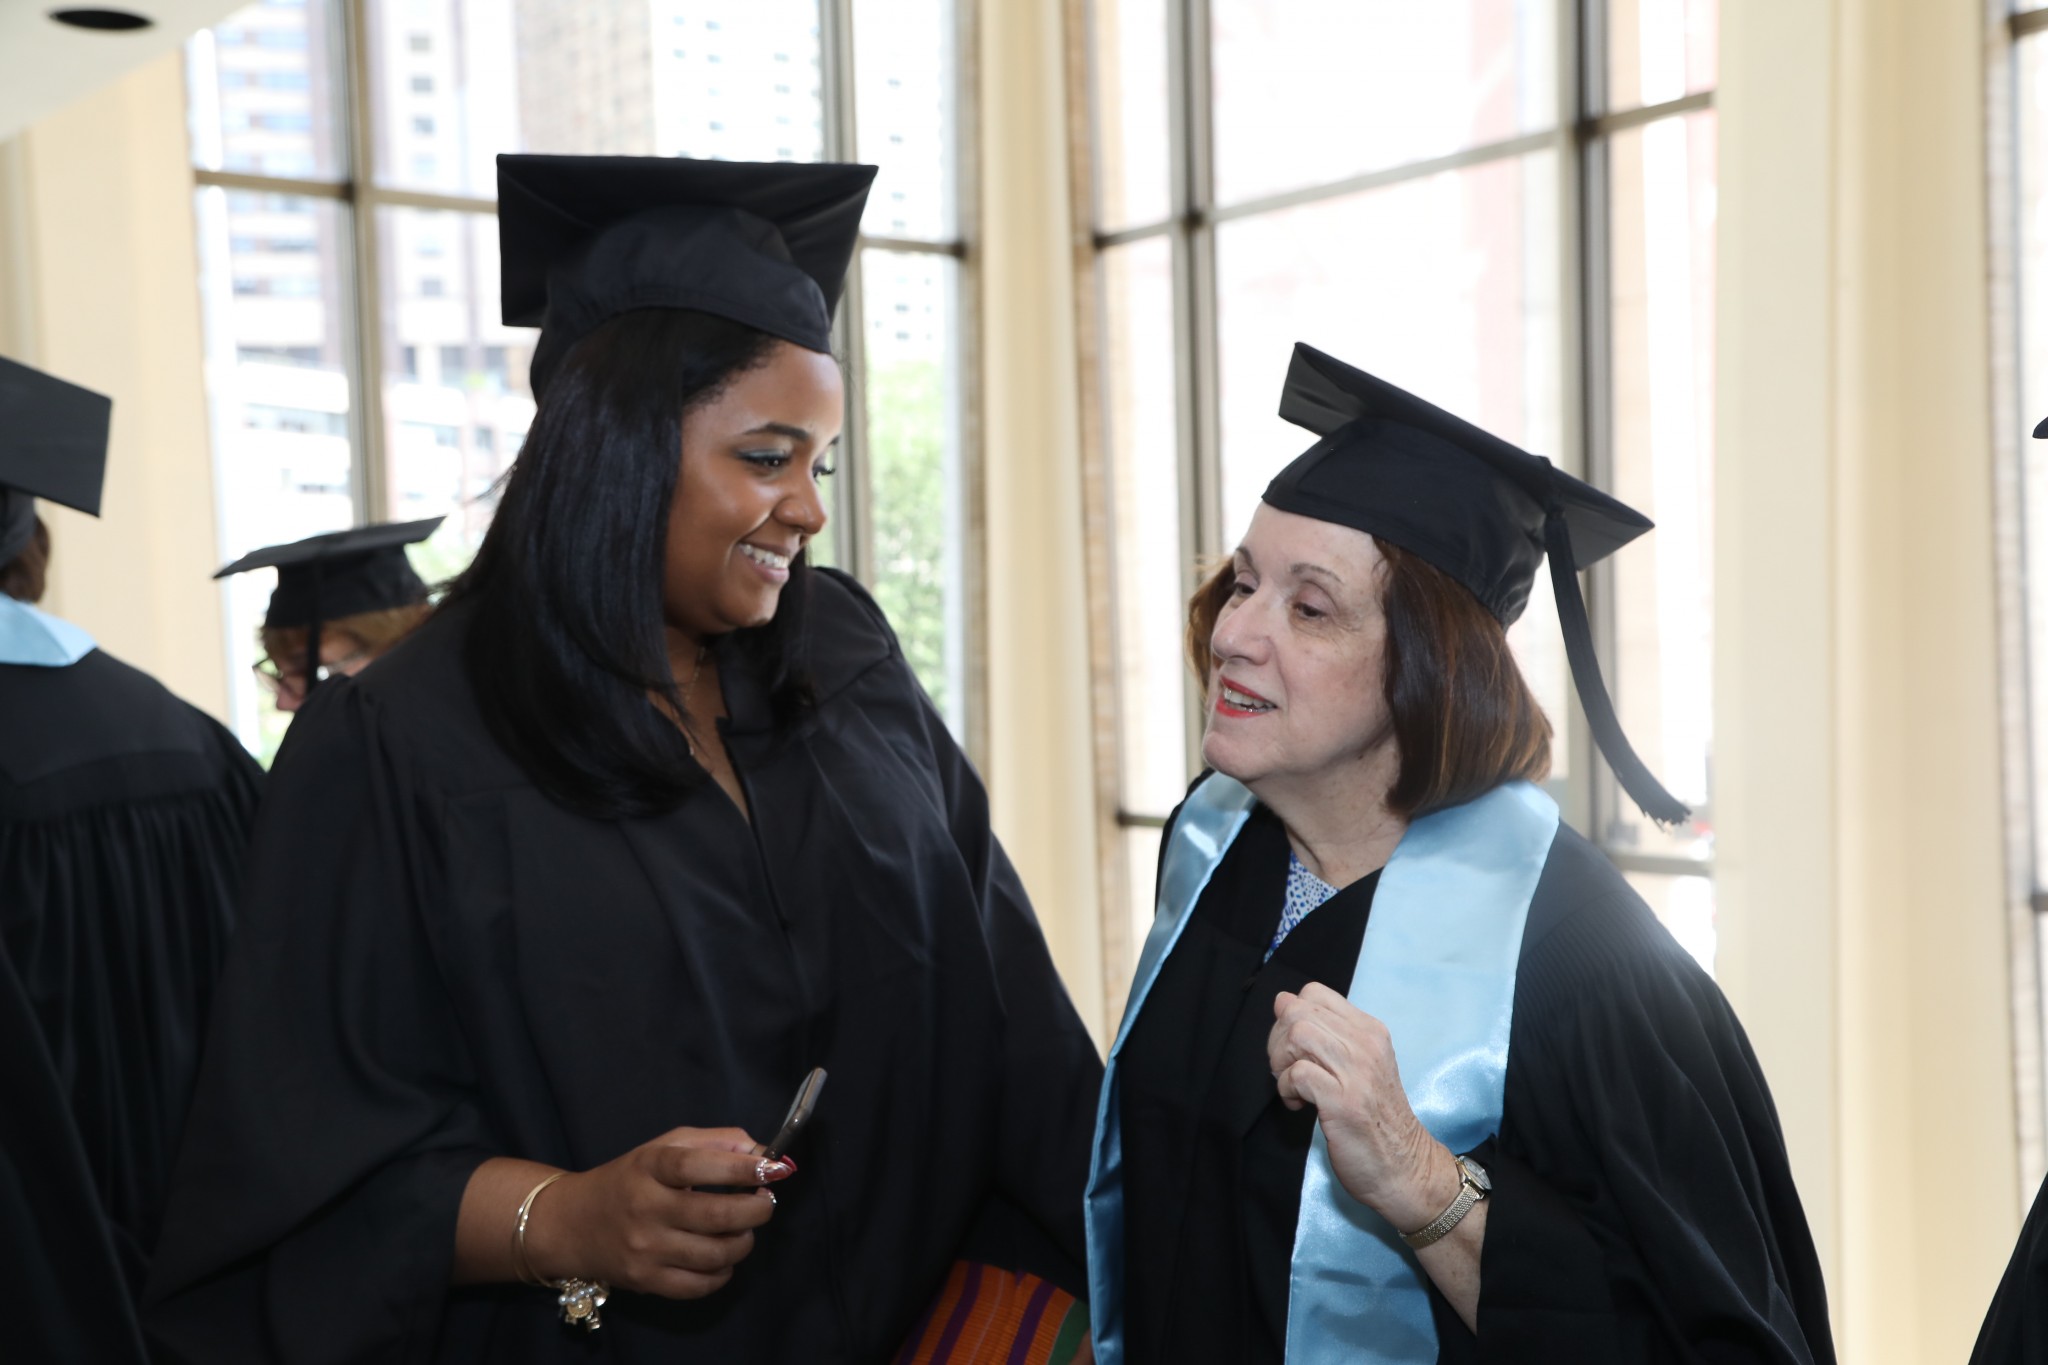 Faculty members talking to each other at Commencement 2017